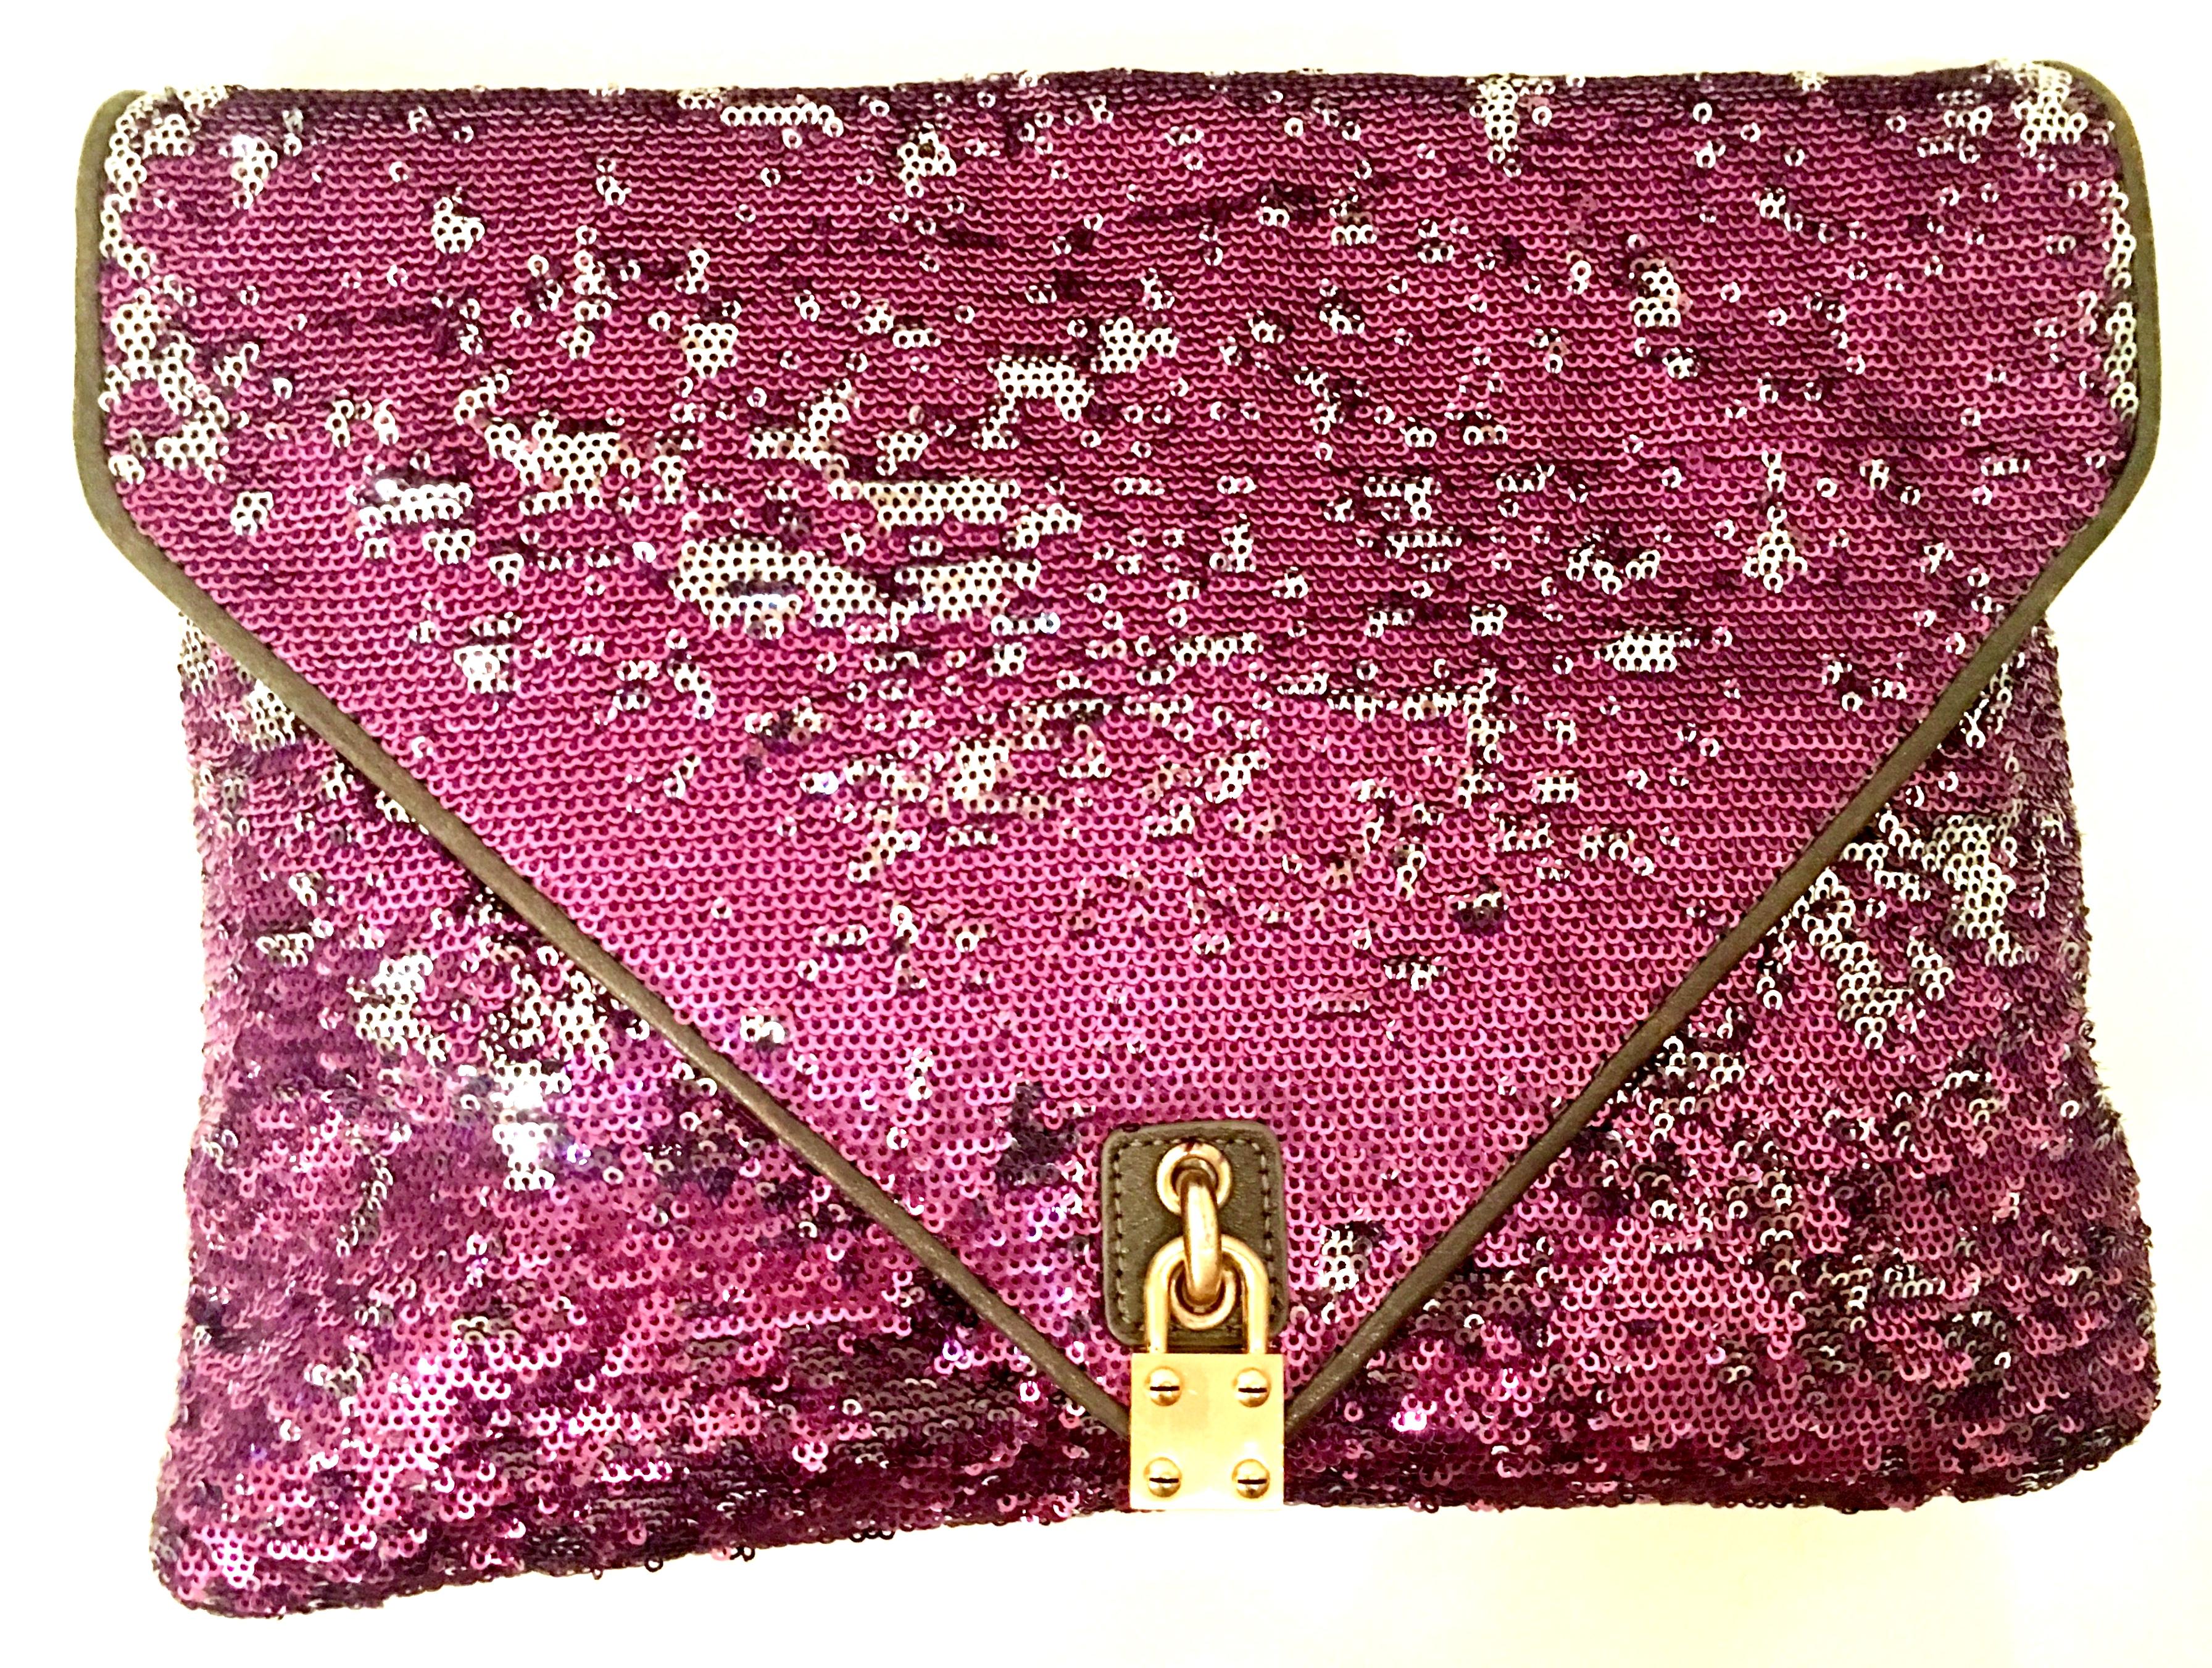 21st Century Reverse Sequin & Leather Envelope Clutch Handbag By, Alexis Hudson. This new with out tags envelope clutch hand bag features brown leather trim with gilt brass hardware. The purple sequins can have more silver tones or less with the